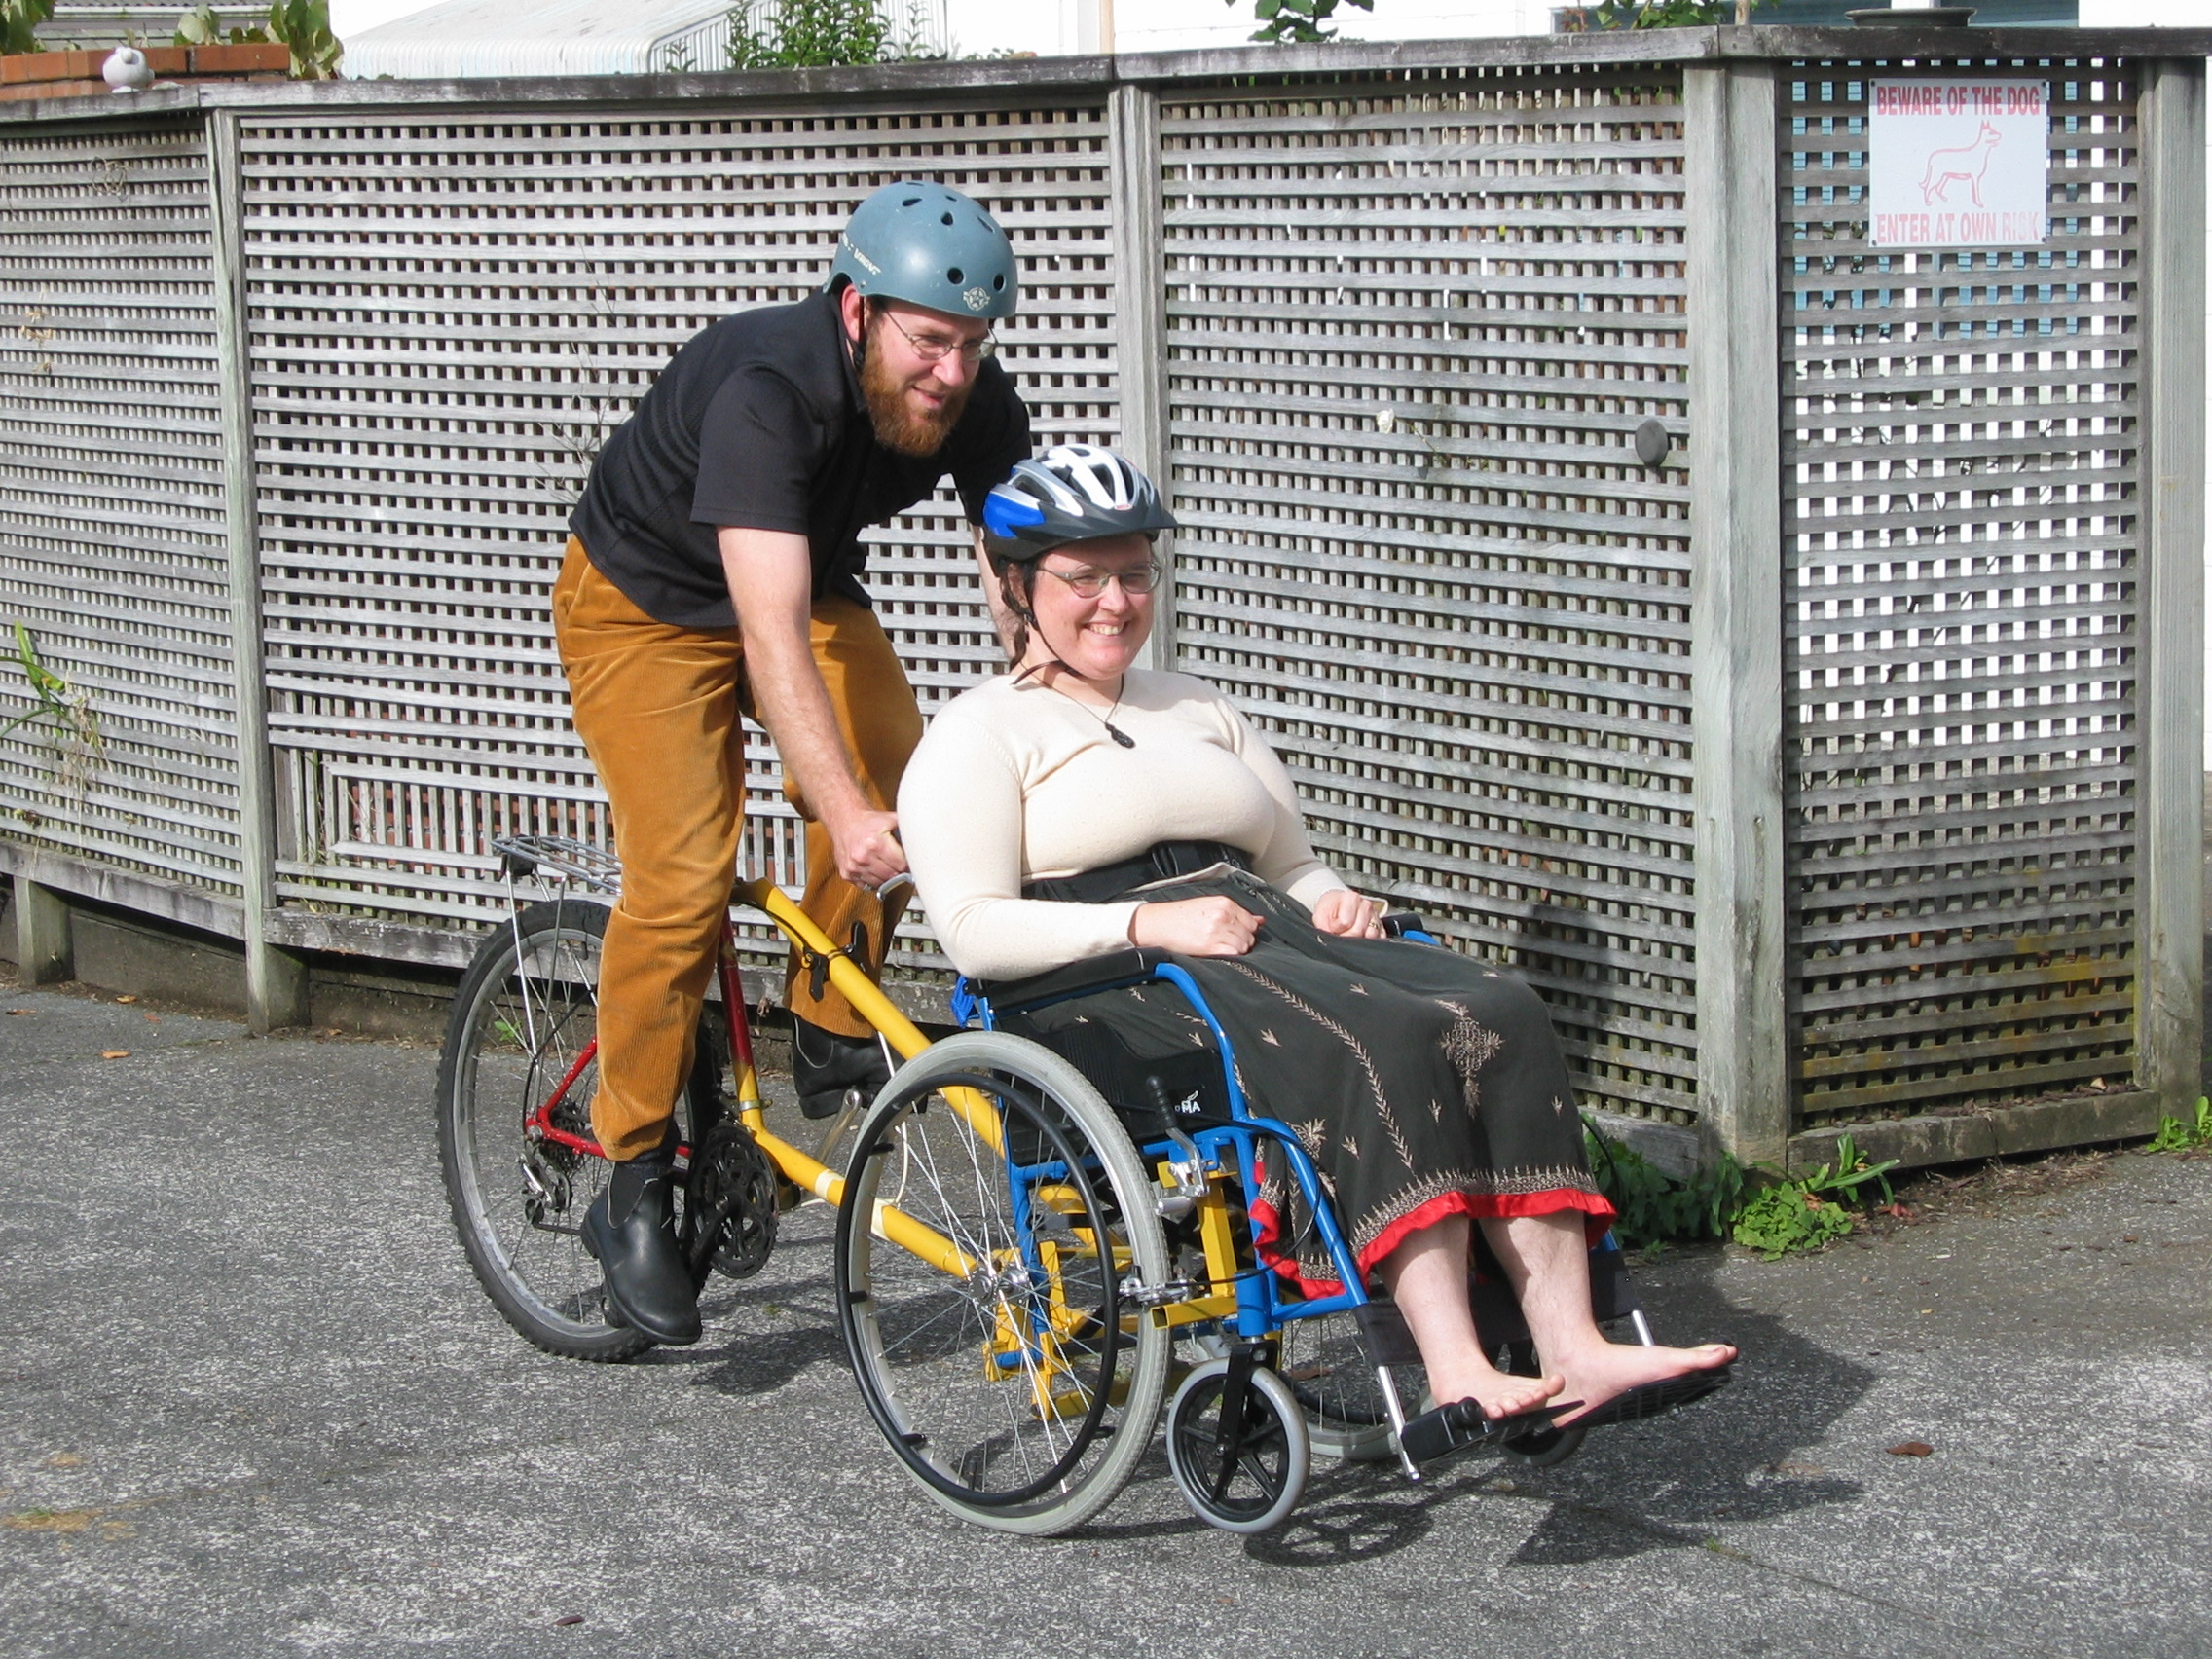 Heather and Martin going for a ride in the wheelchair bike